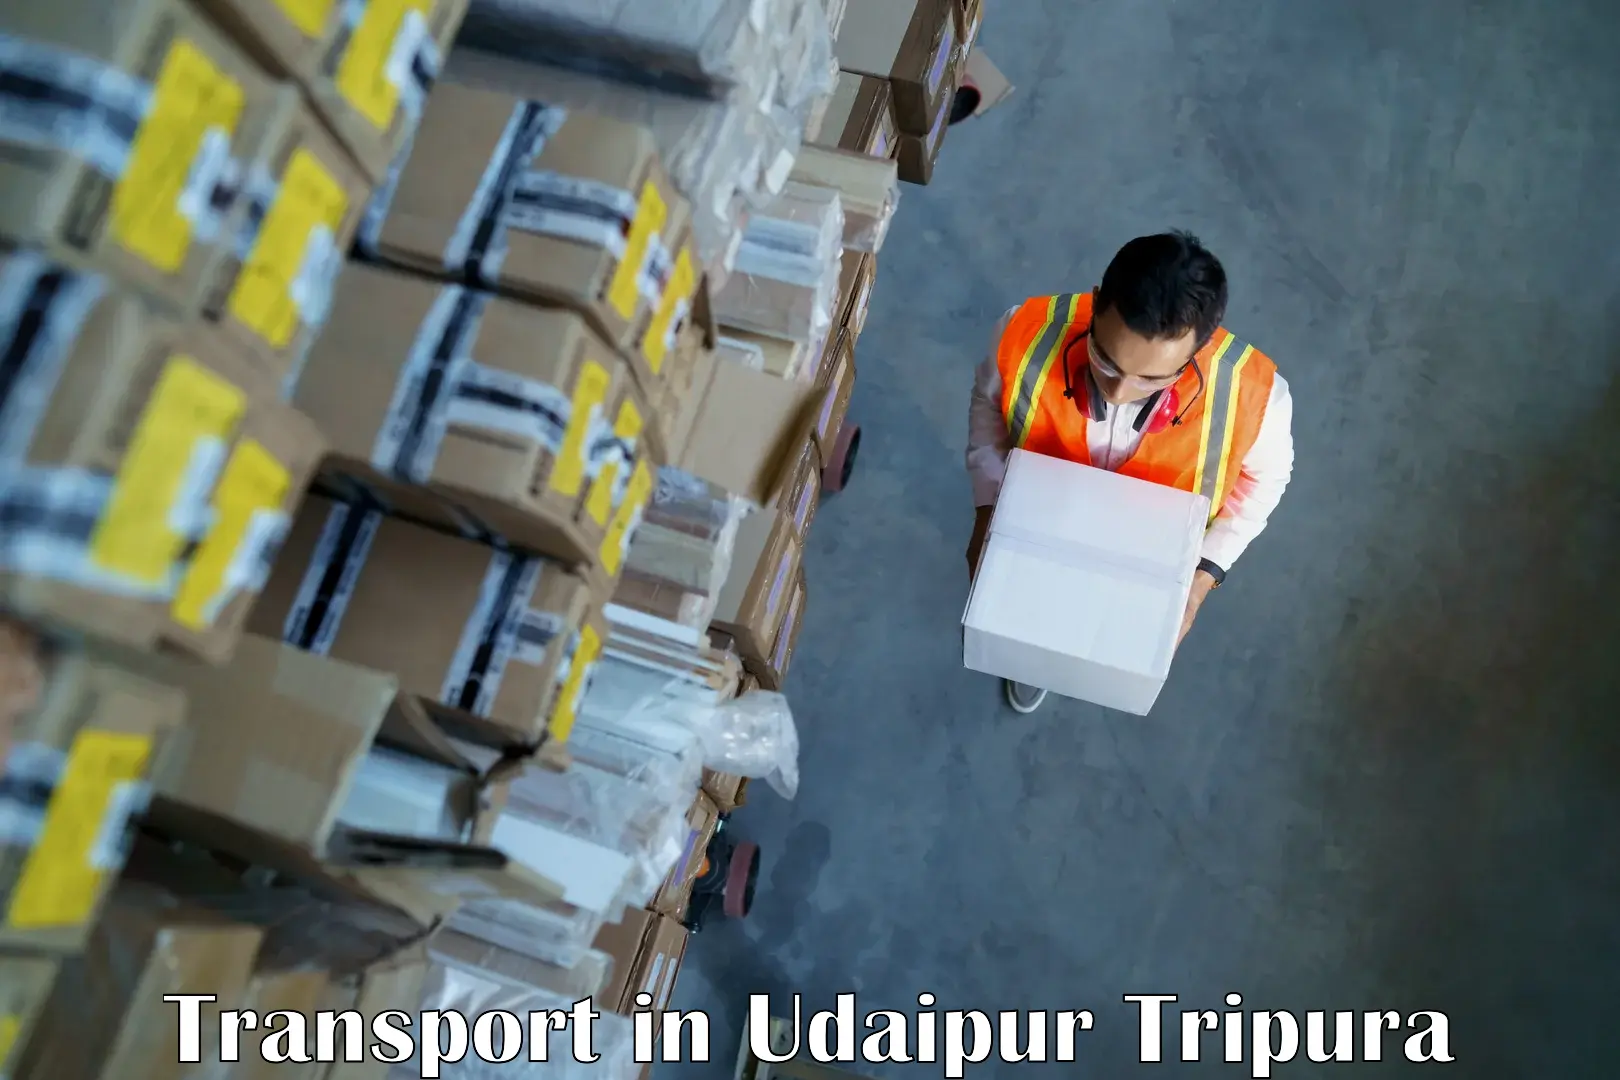 Express transport services in Udaipur Tripura